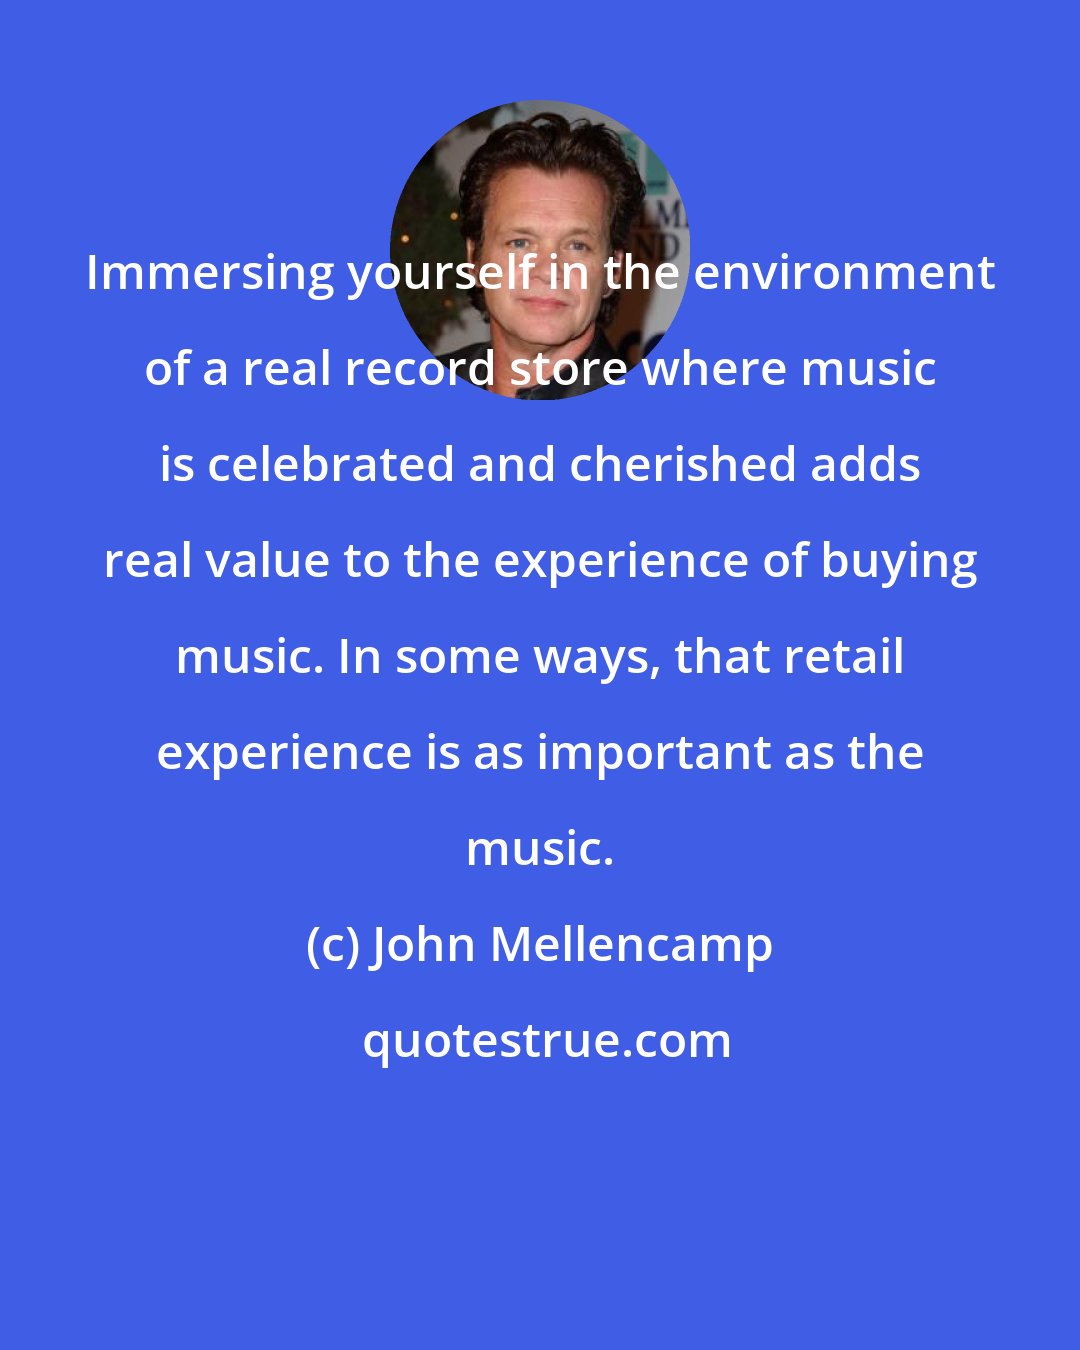 John Mellencamp: Immersing yourself in the environment of a real record store where music is celebrated and cherished adds real value to the experience of buying music. In some ways, that retail experience is as important as the music.